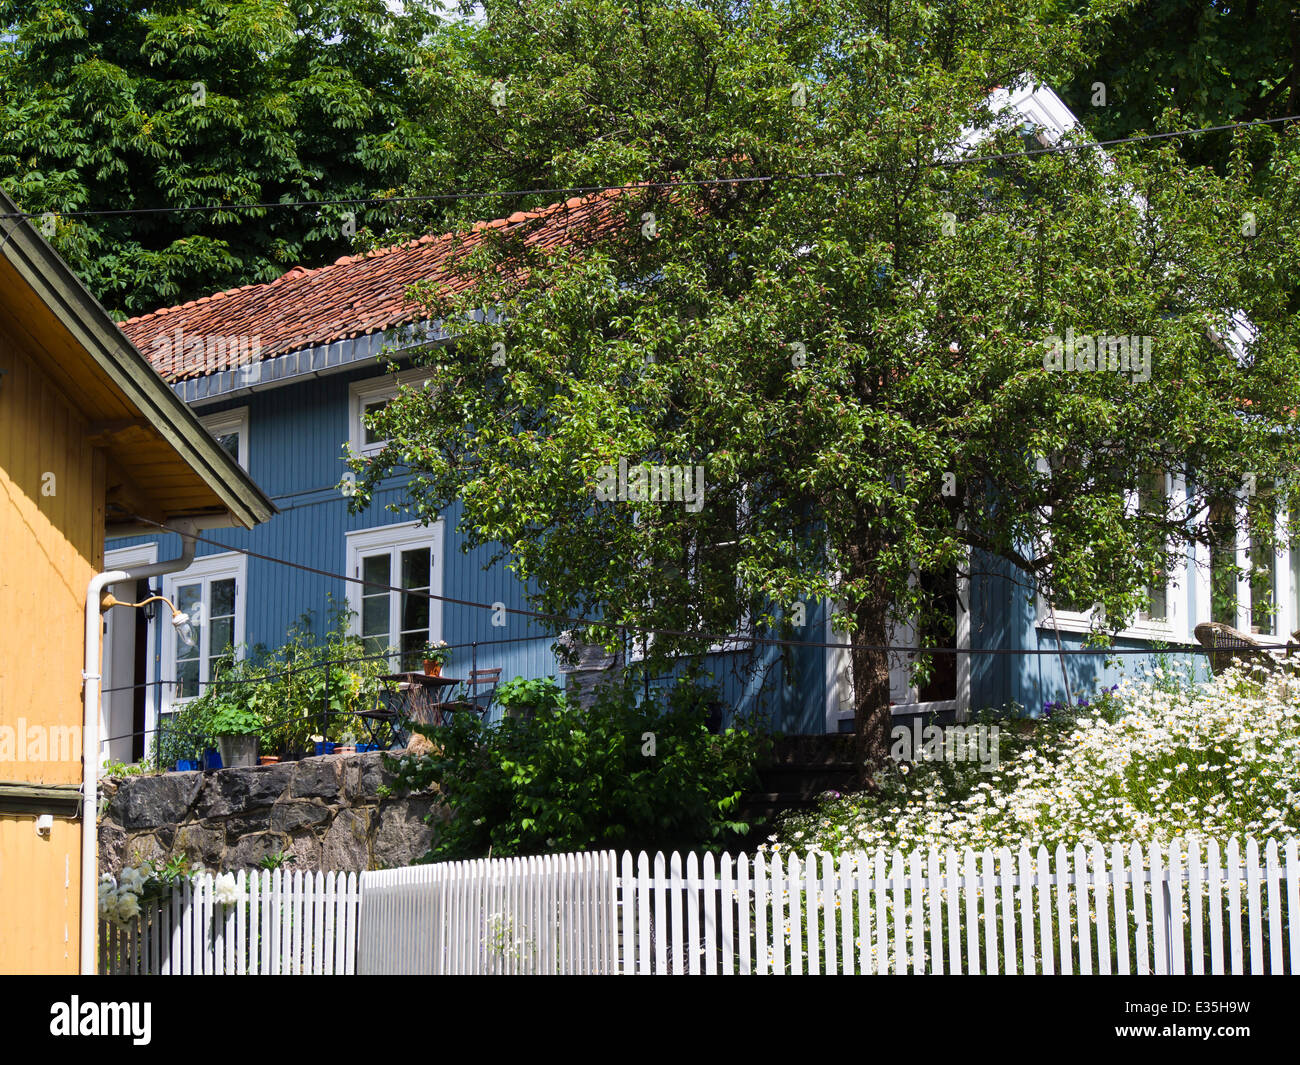 Old wooden paneled houses in Drobak  Norway typical of many small Norwegian seaside towns Stock Photo